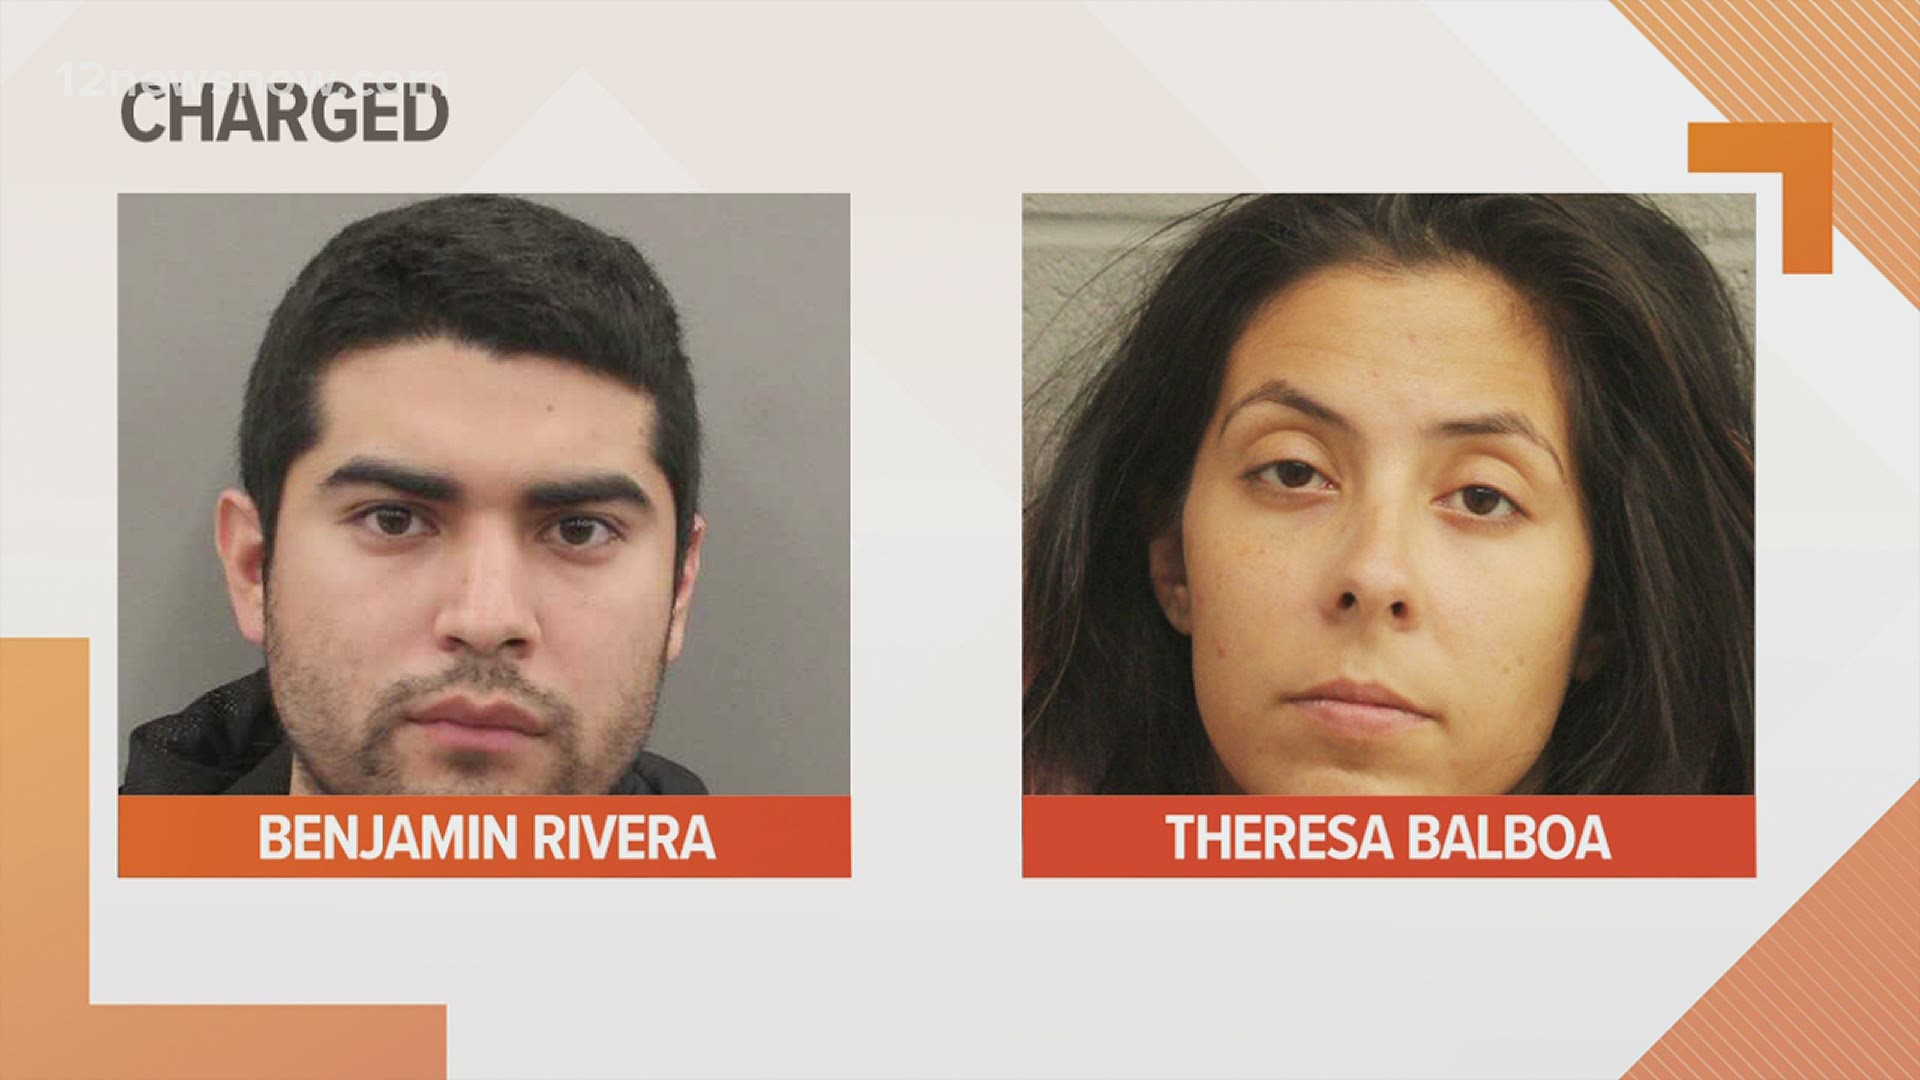 Benjamin Rivera is the roommate of Theresa Balboa, and is facing similar charges. Balboa is the girlfriend of the father of Samuel Olson.